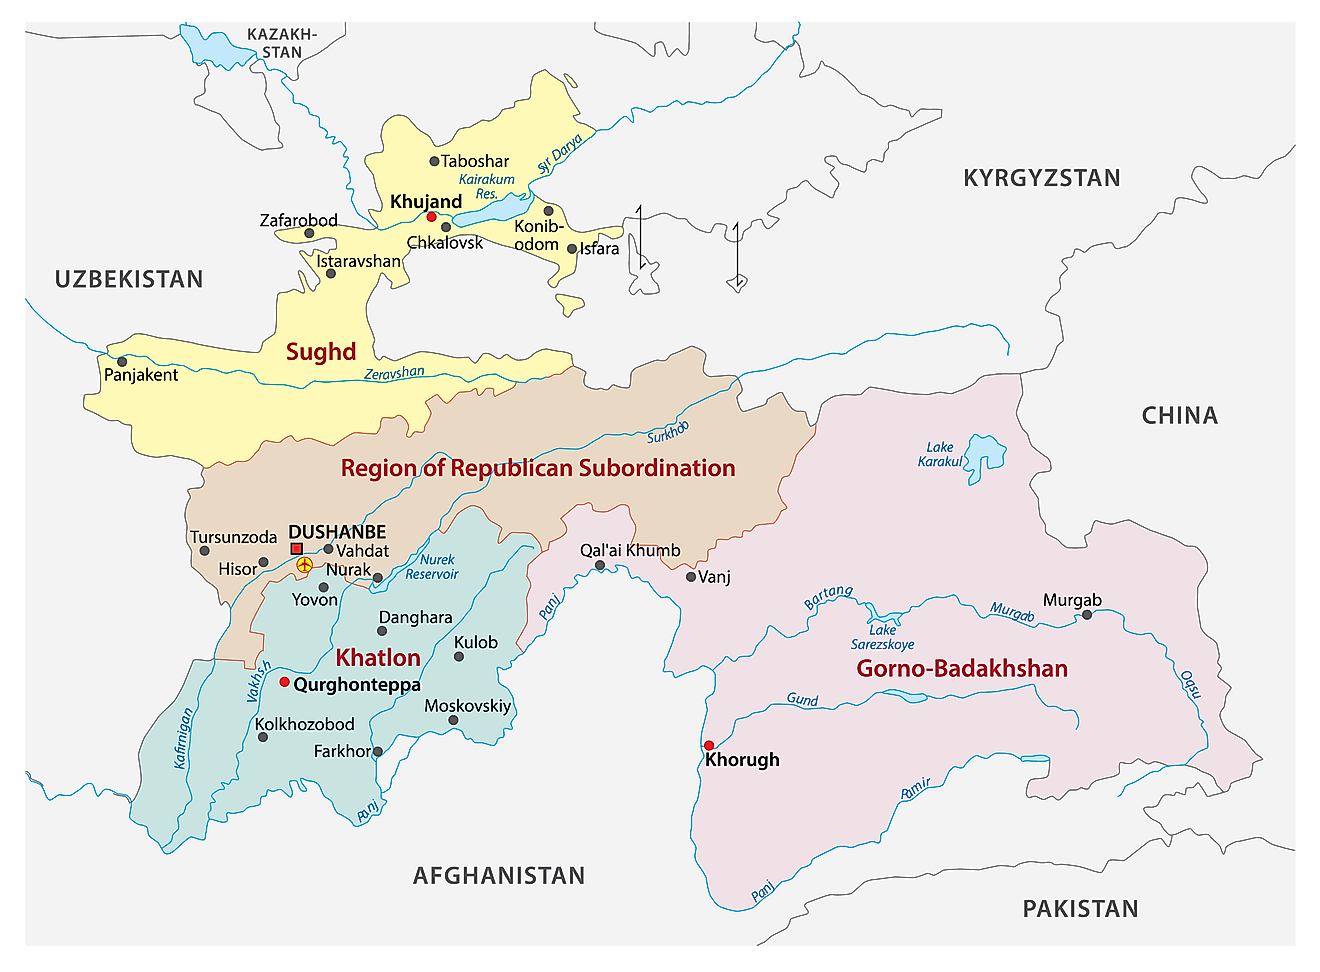 The Political Map of Tajikistan displaying its four provinces, their capitals and the capital city of Dushanbe.